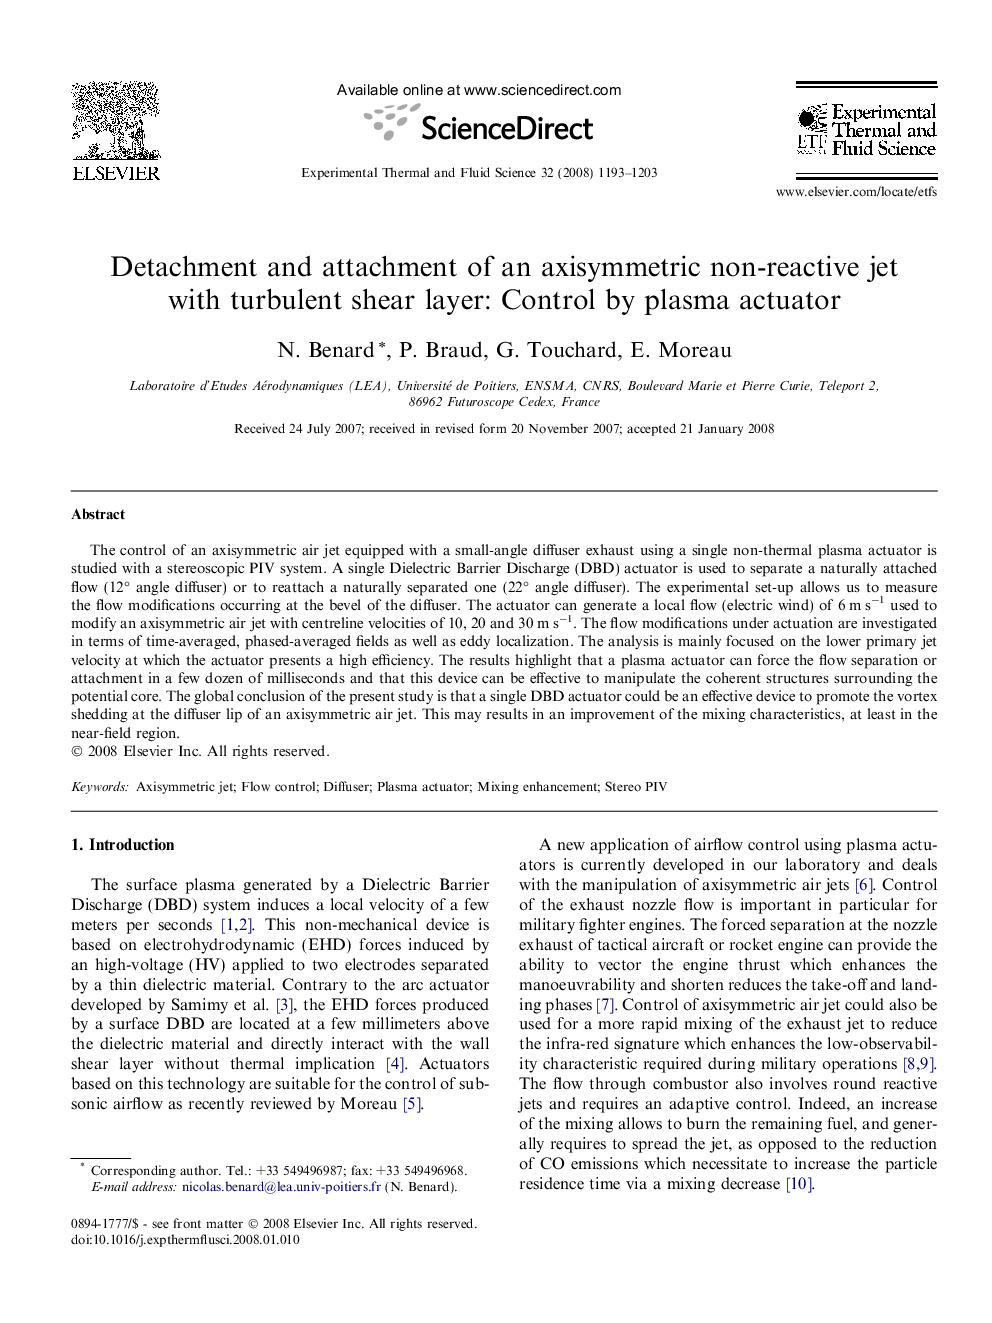 Detachment and attachment of an axisymmetric non-reactive jet with turbulent shear layer: Control by plasma actuator